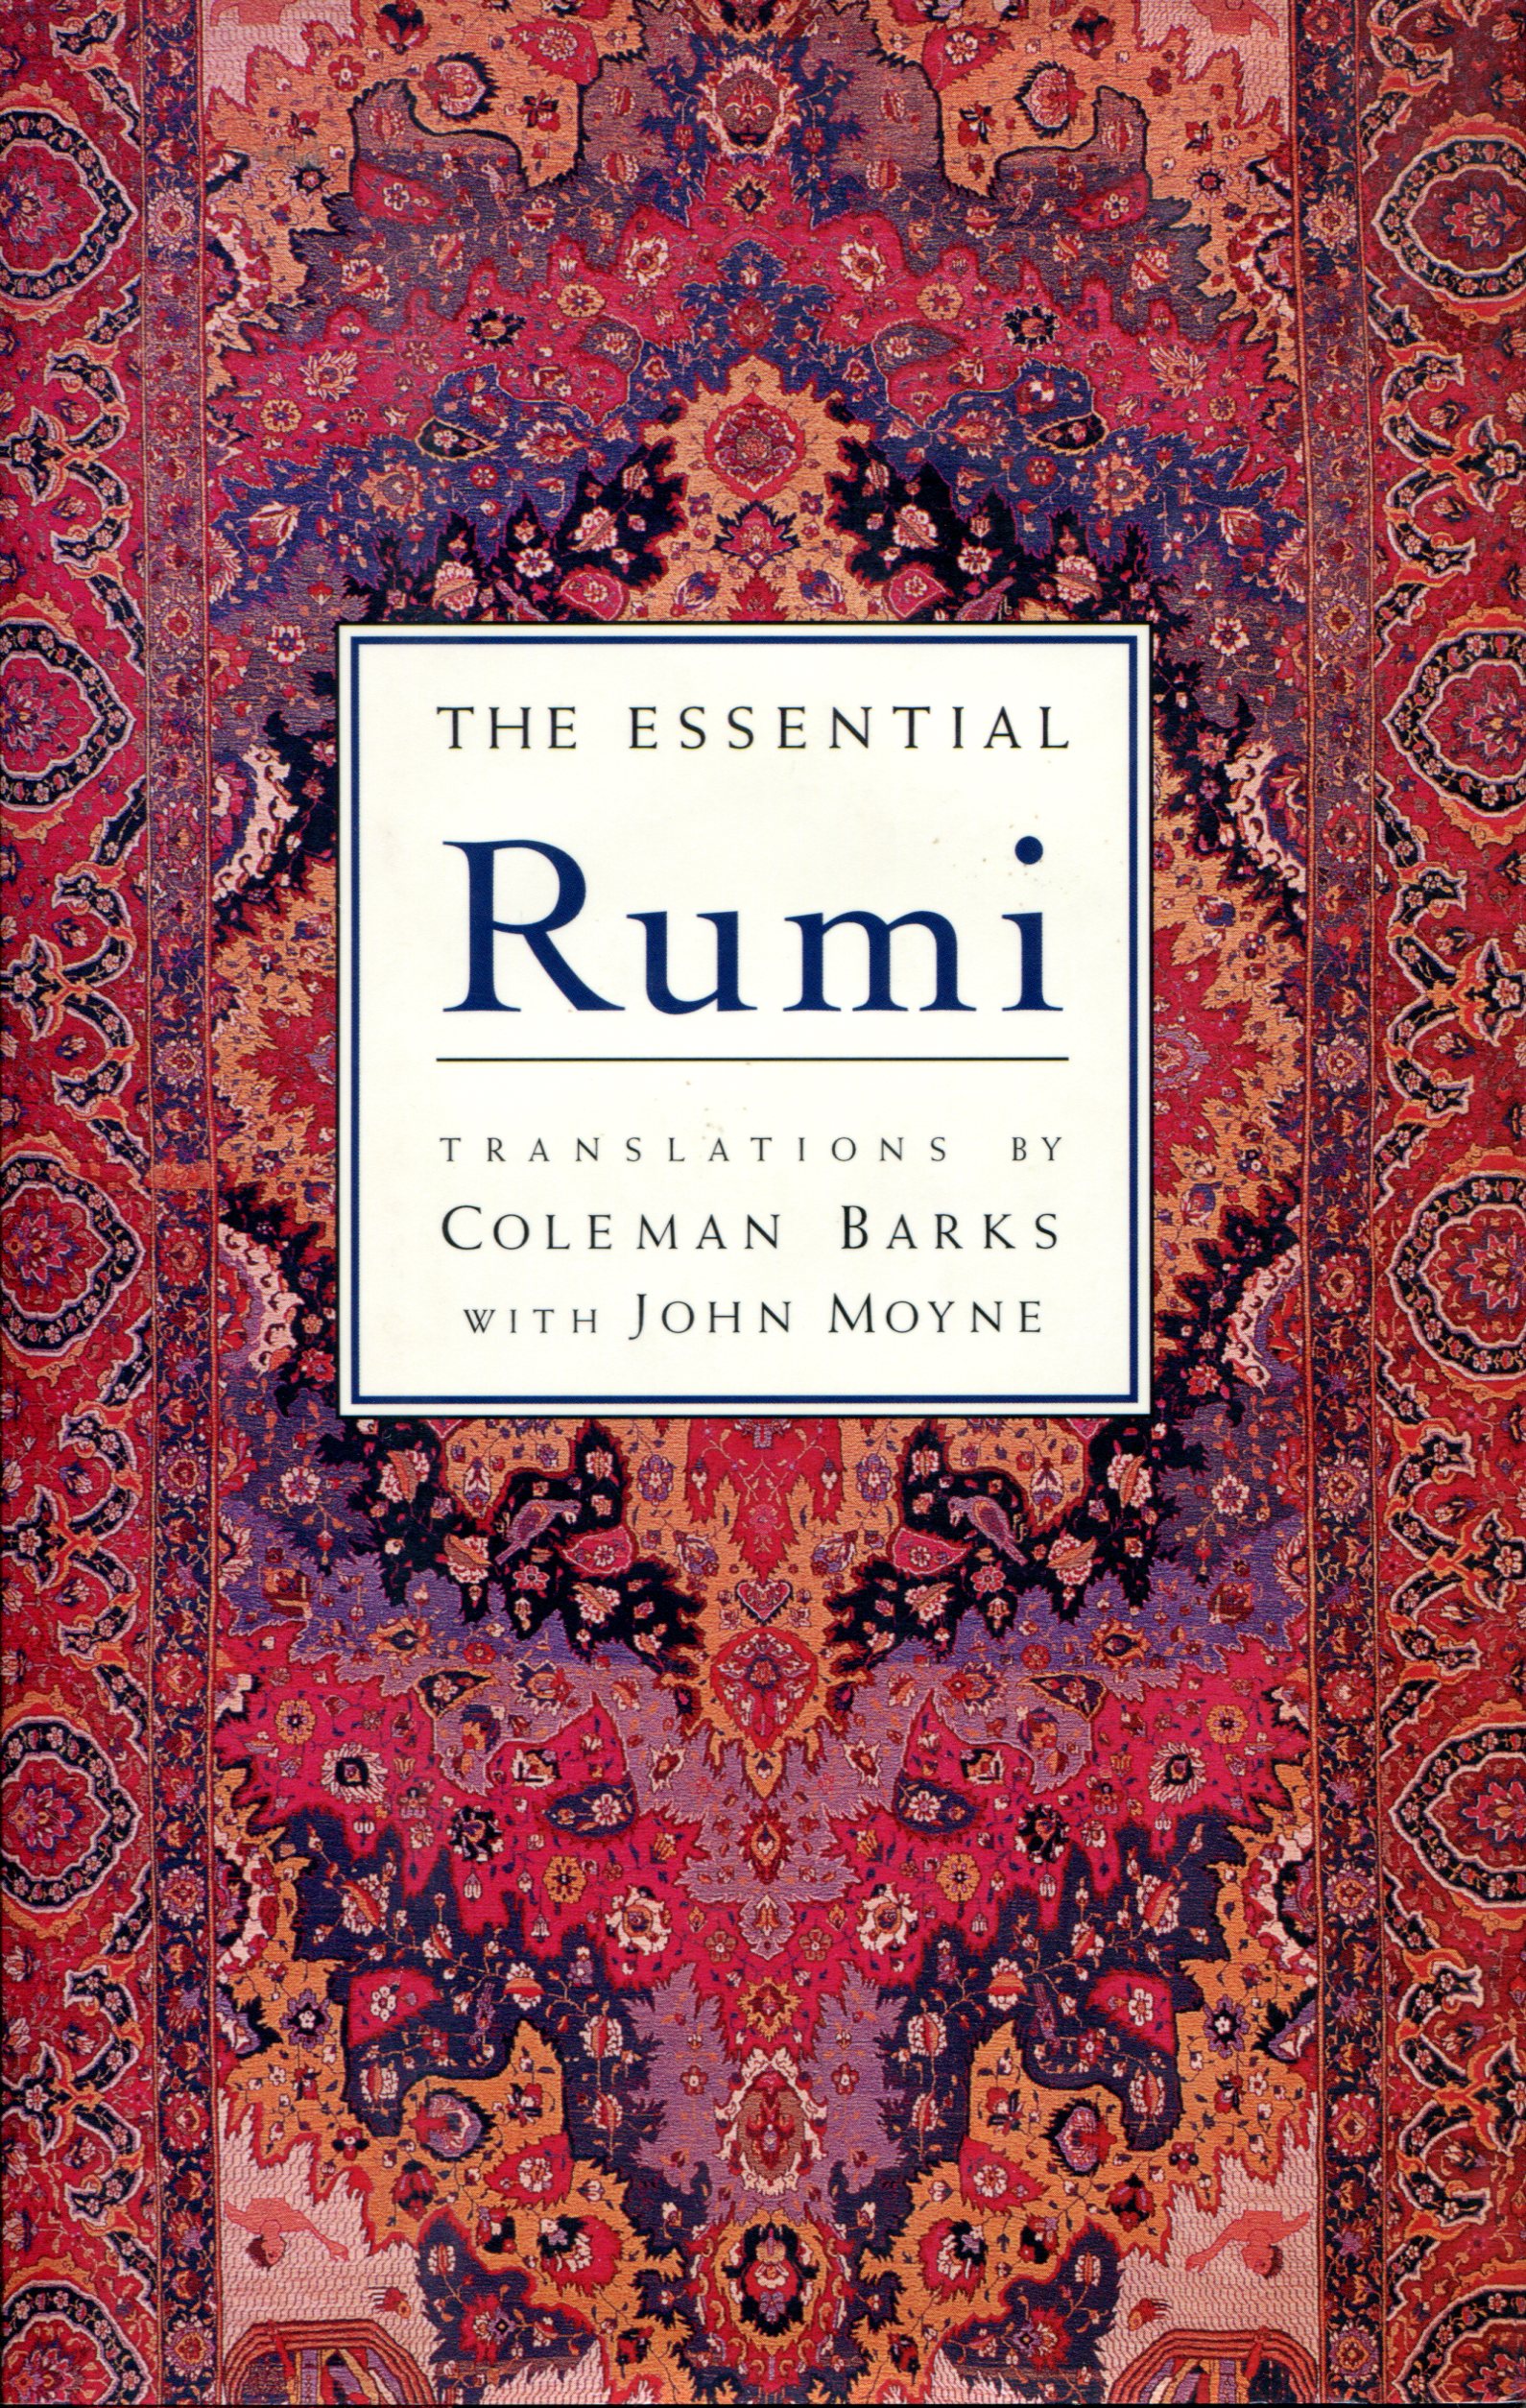 The Essential Rumi by Coleman Barks